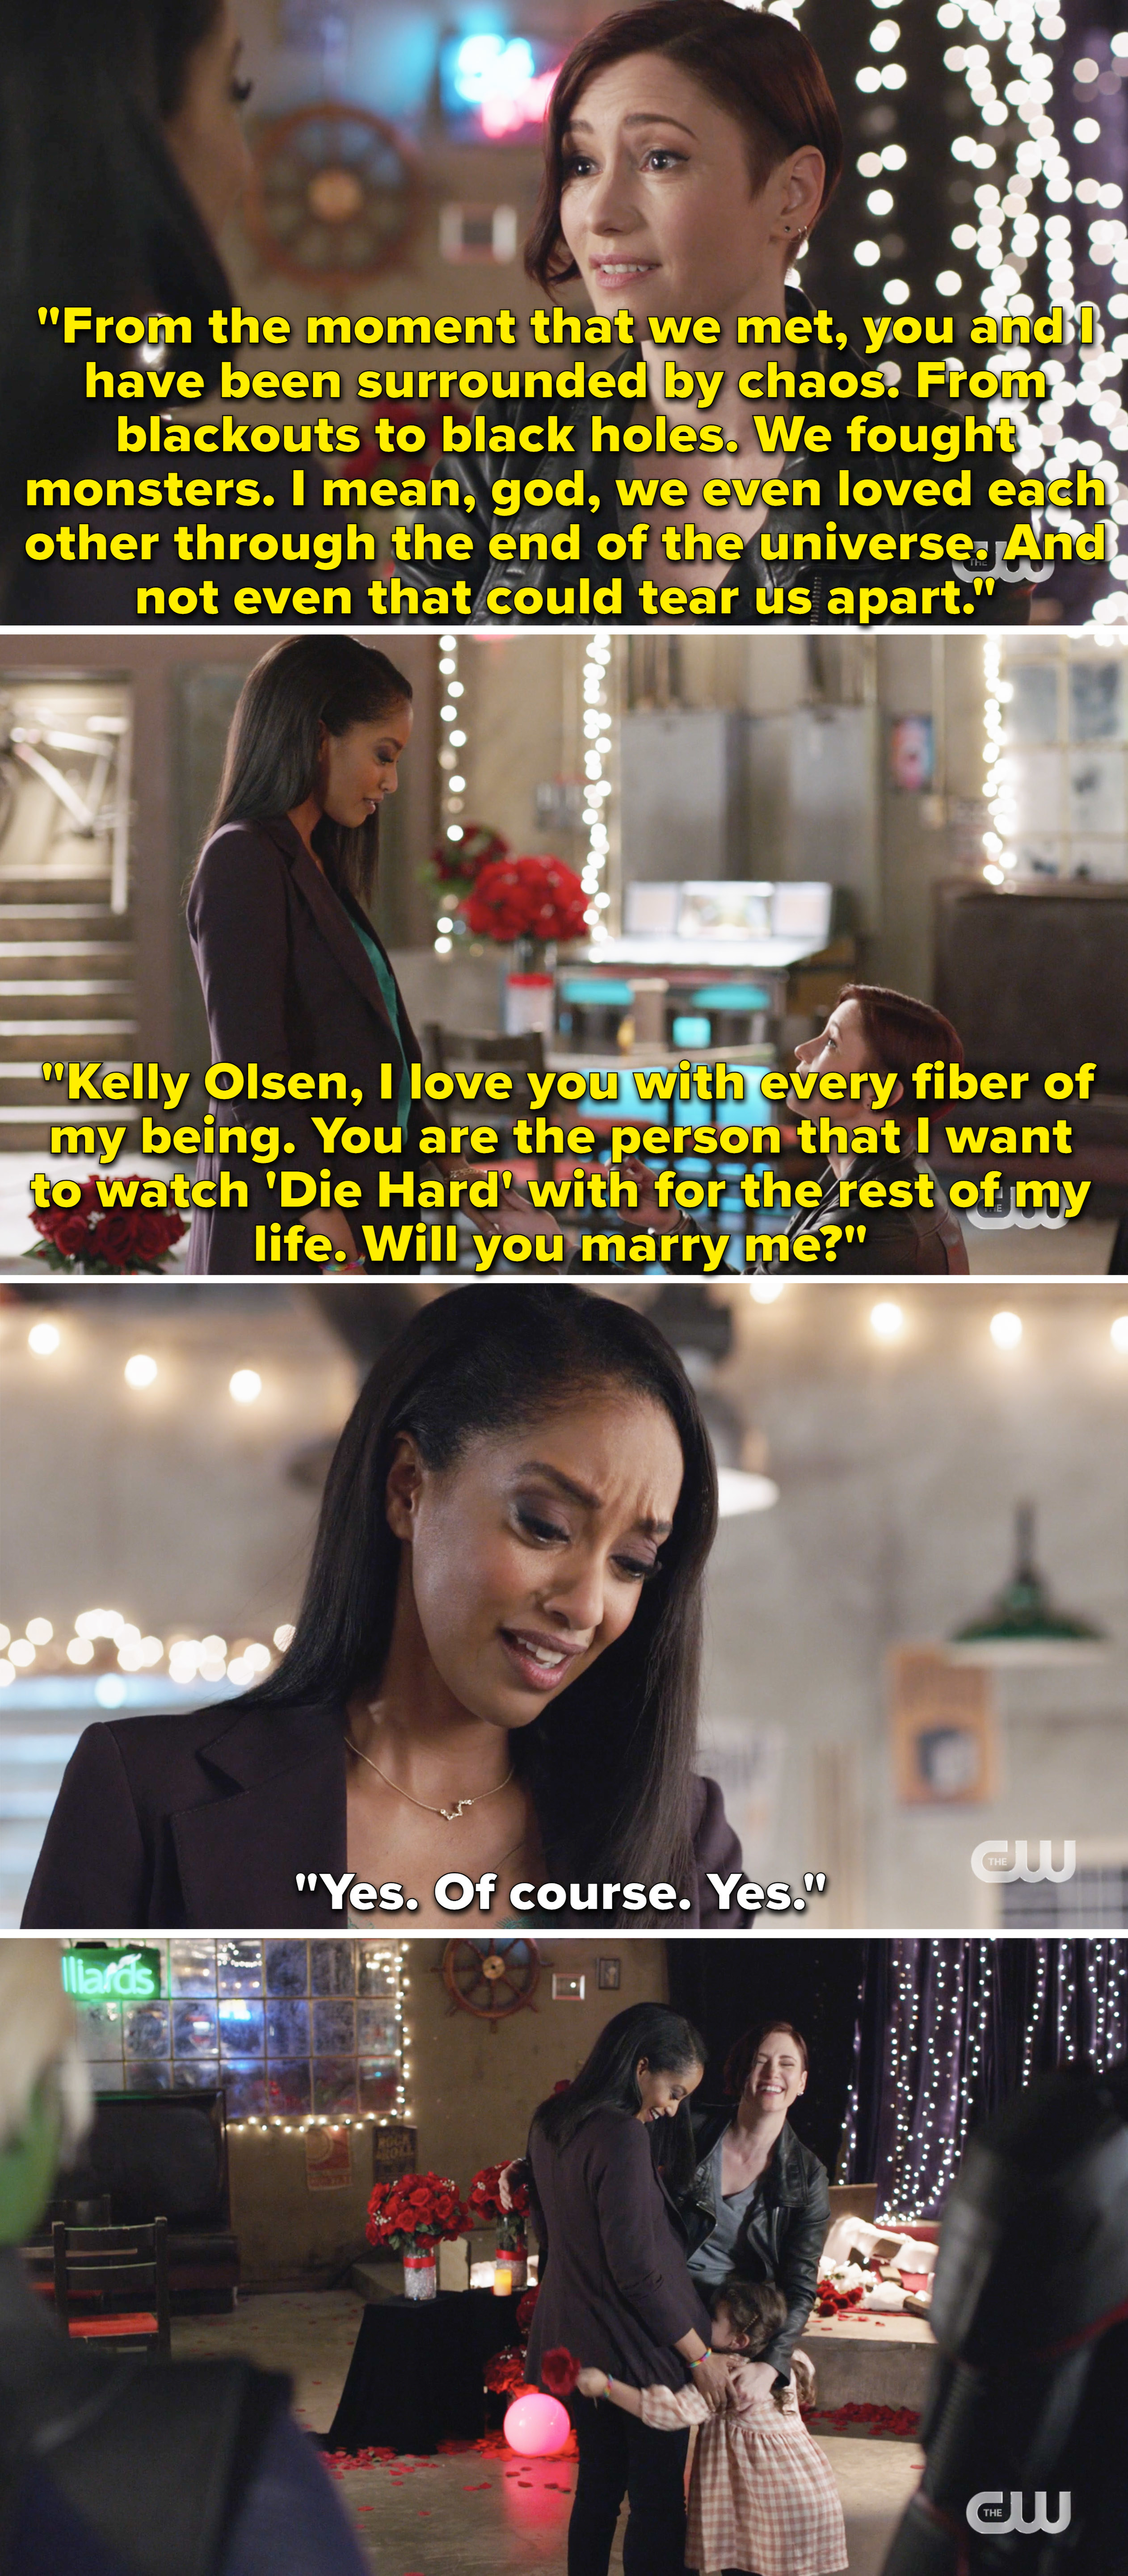 Alex getting down on one knee and proposing to Kelly and Kelly saying yes